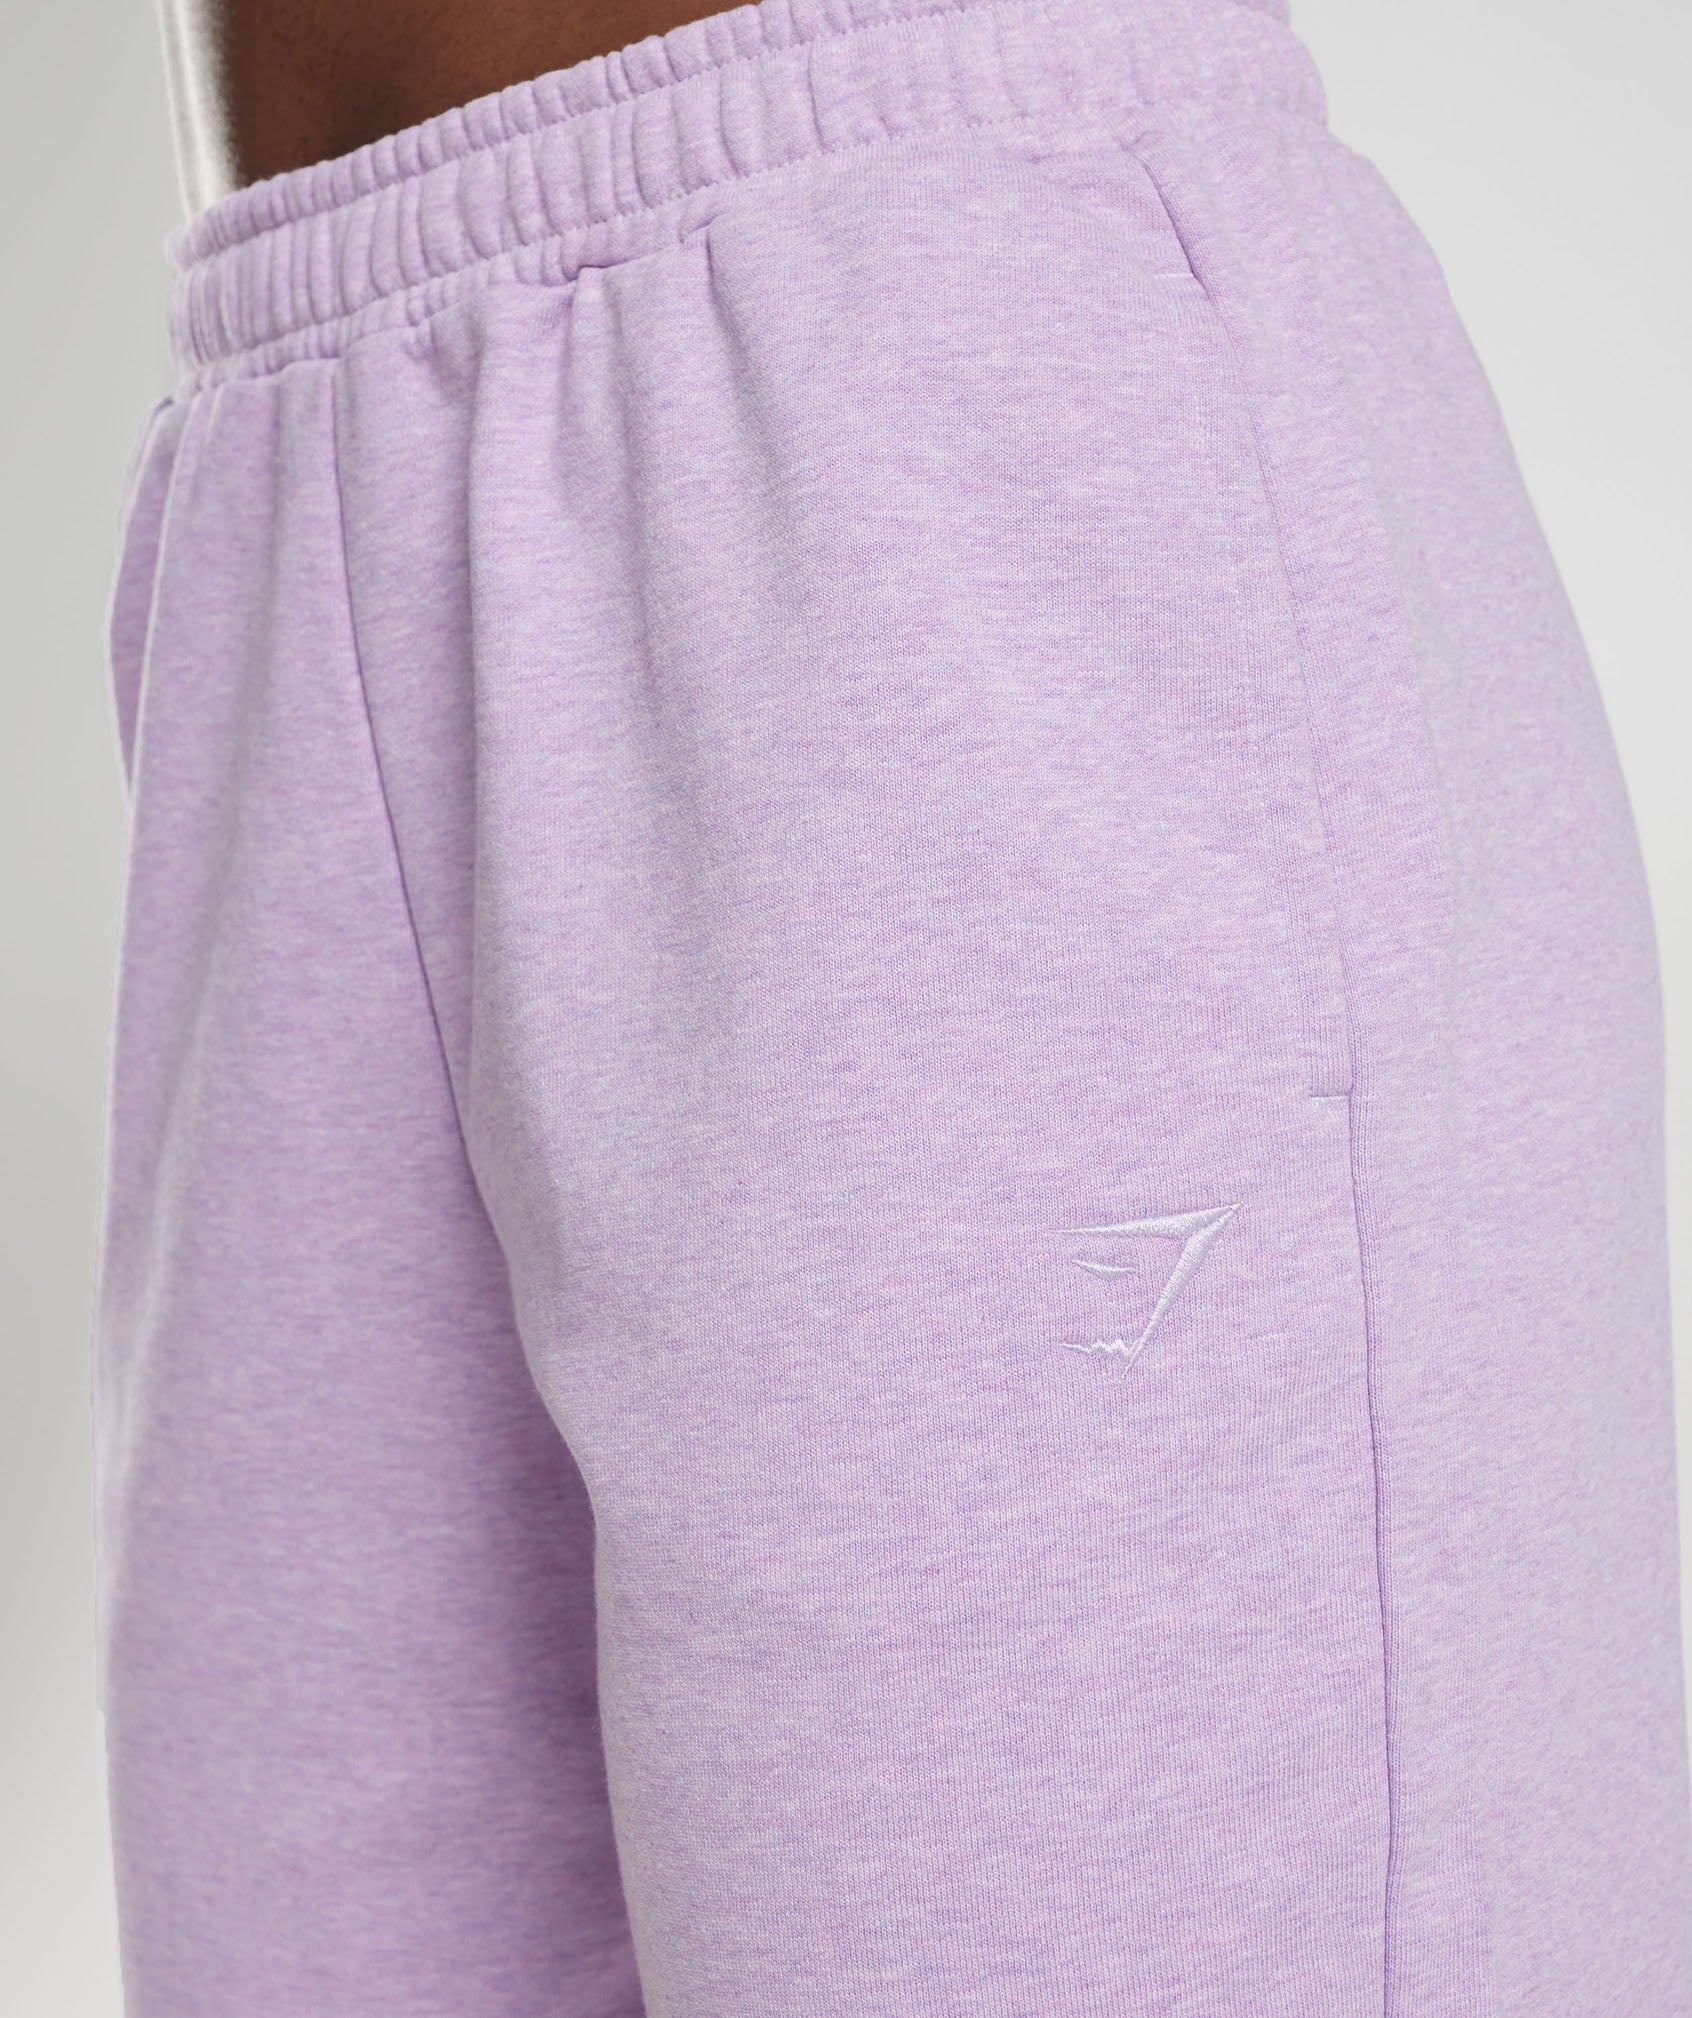 Rest Day Sweats Joggers in Aura Lilac Marl - view 5